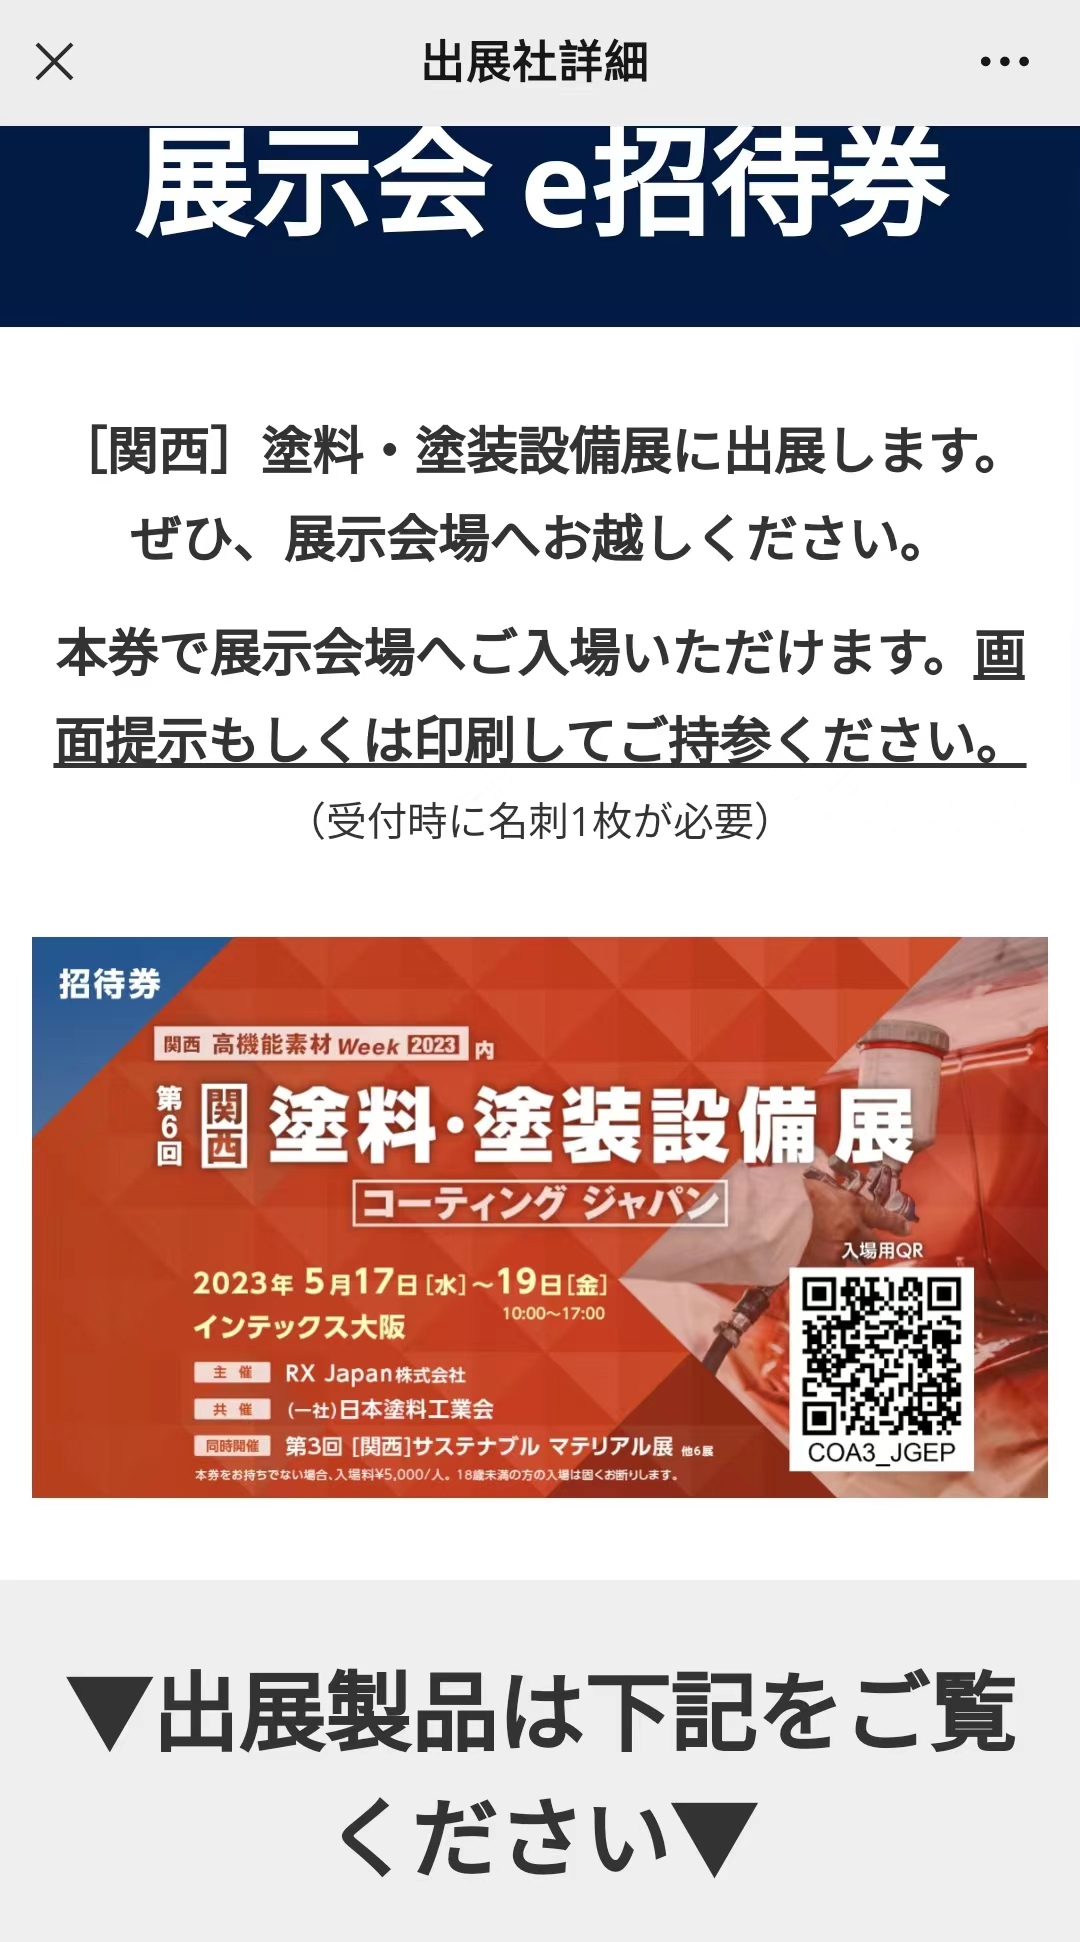 Sanwei will attend exhibition of 2023 Coating Japan & Joining Japan